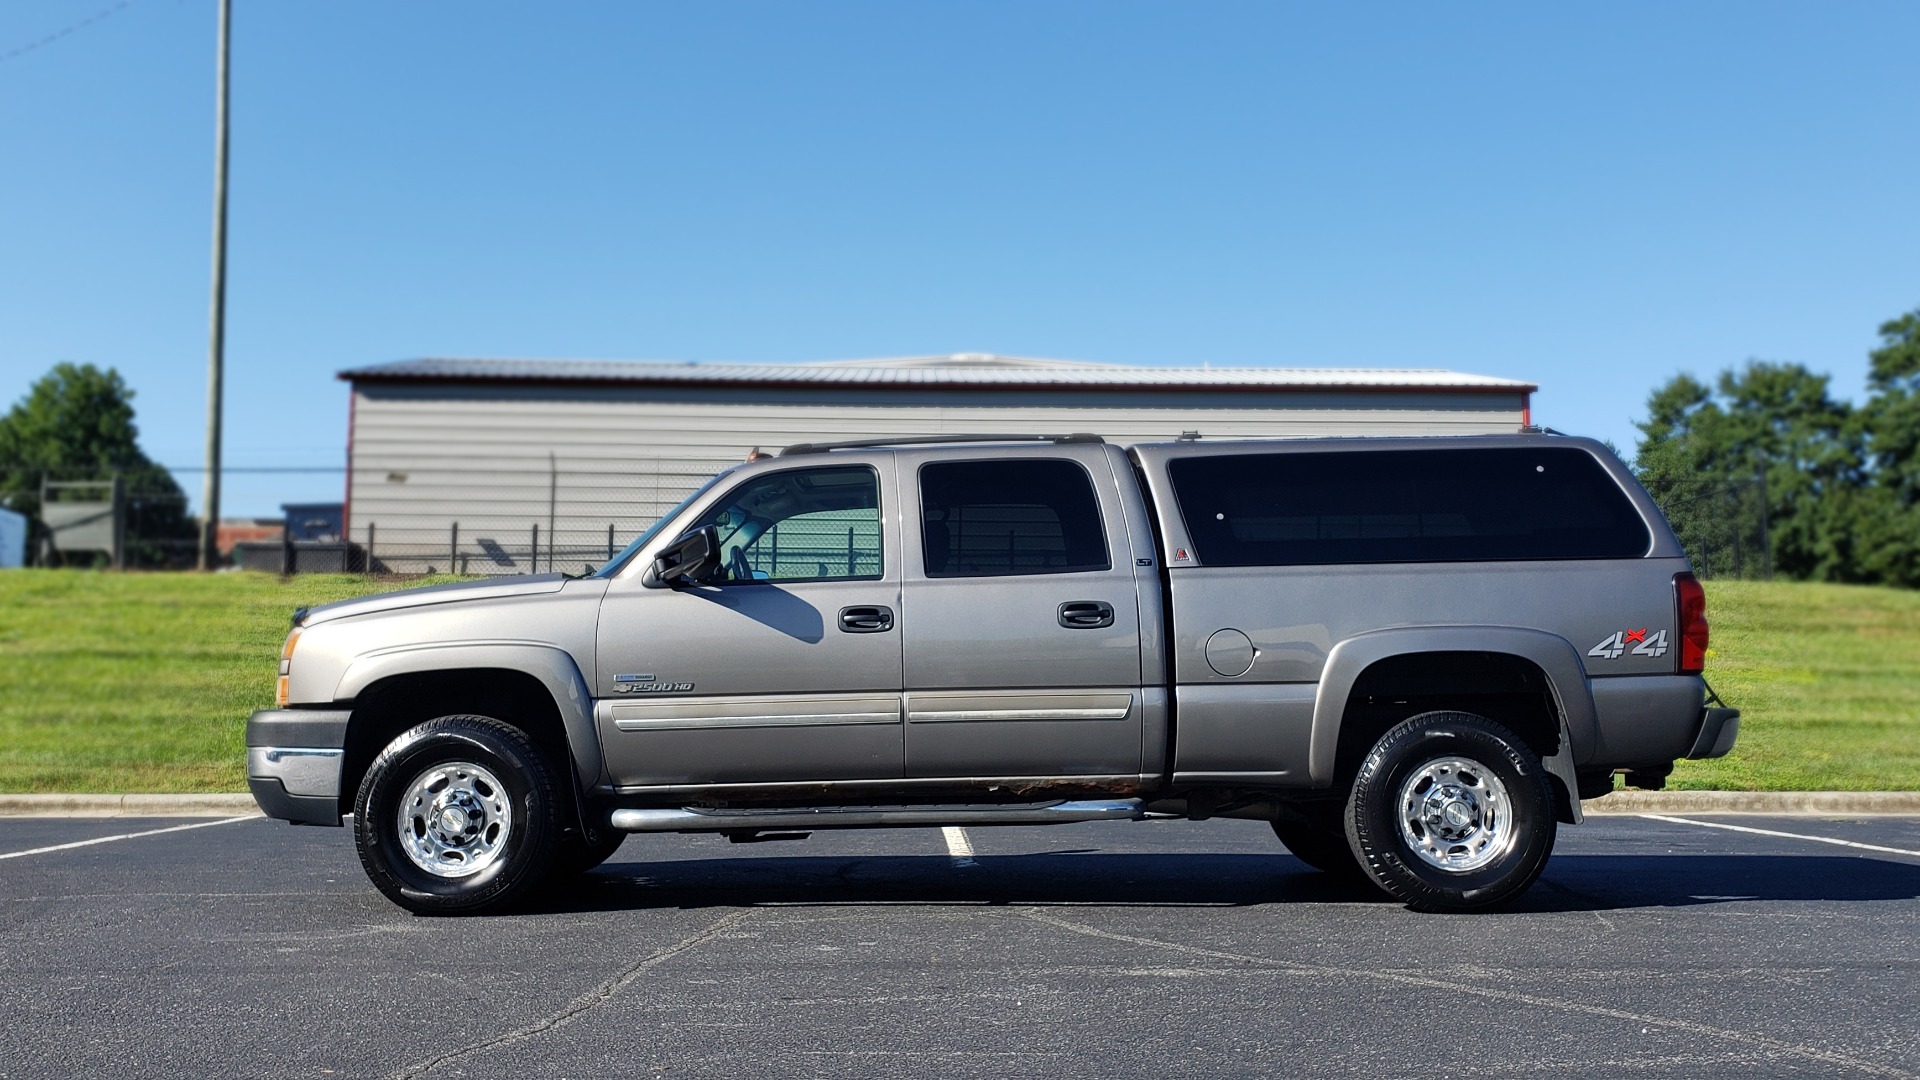 Used 2007 Chevrolet SILVERADO 2500HD CLASSIC LT3 CREWCAB / 4WD / 6.6L DURAMAX / SUNROOF / BOSE / CAMPER SHELL for sale Sold at Formula Imports in Charlotte NC 28227 6